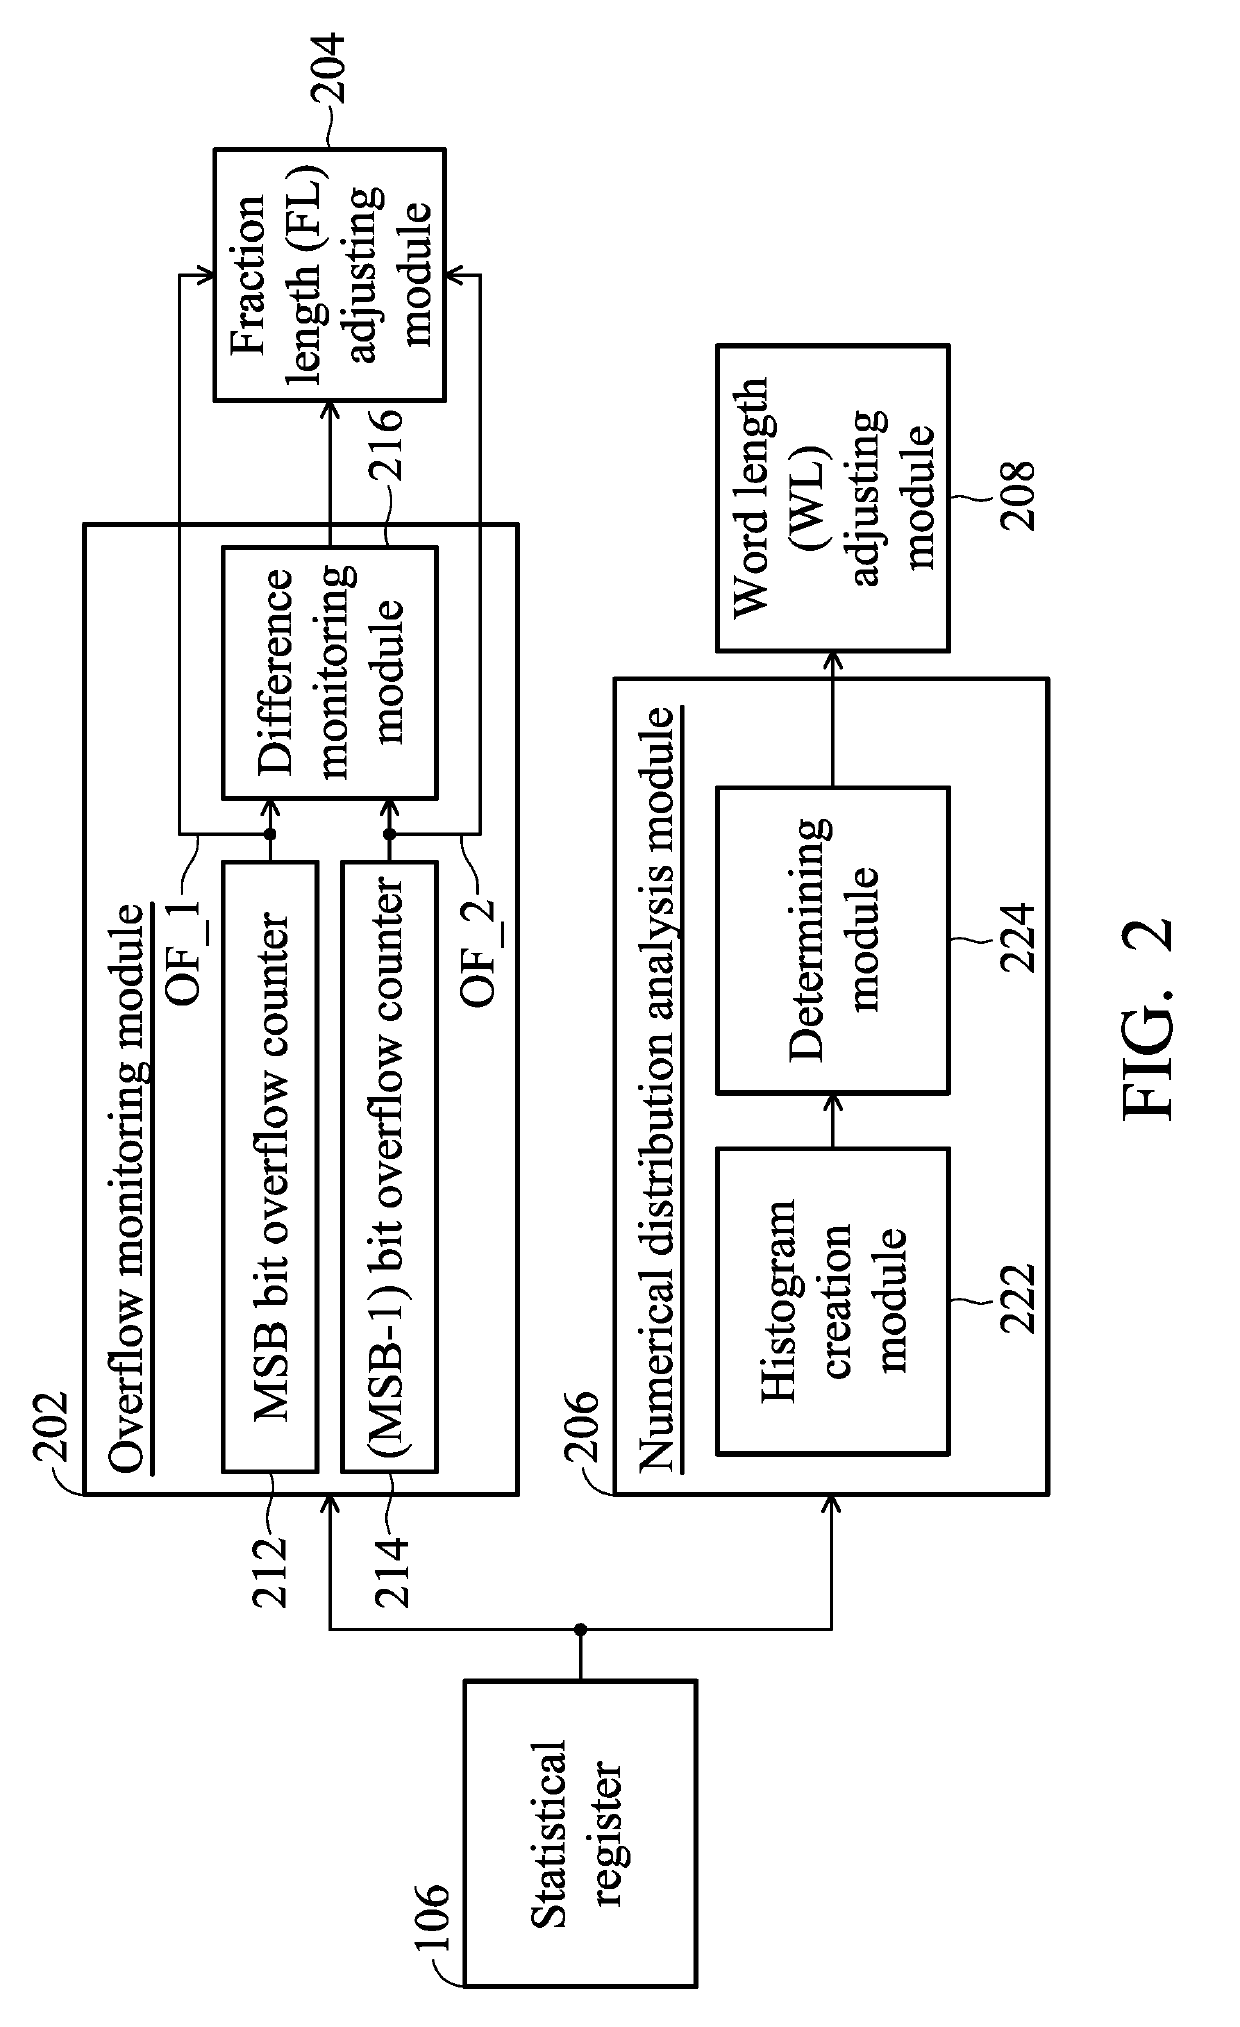 Microprocessor with dynamically adjustable bit width for processing data